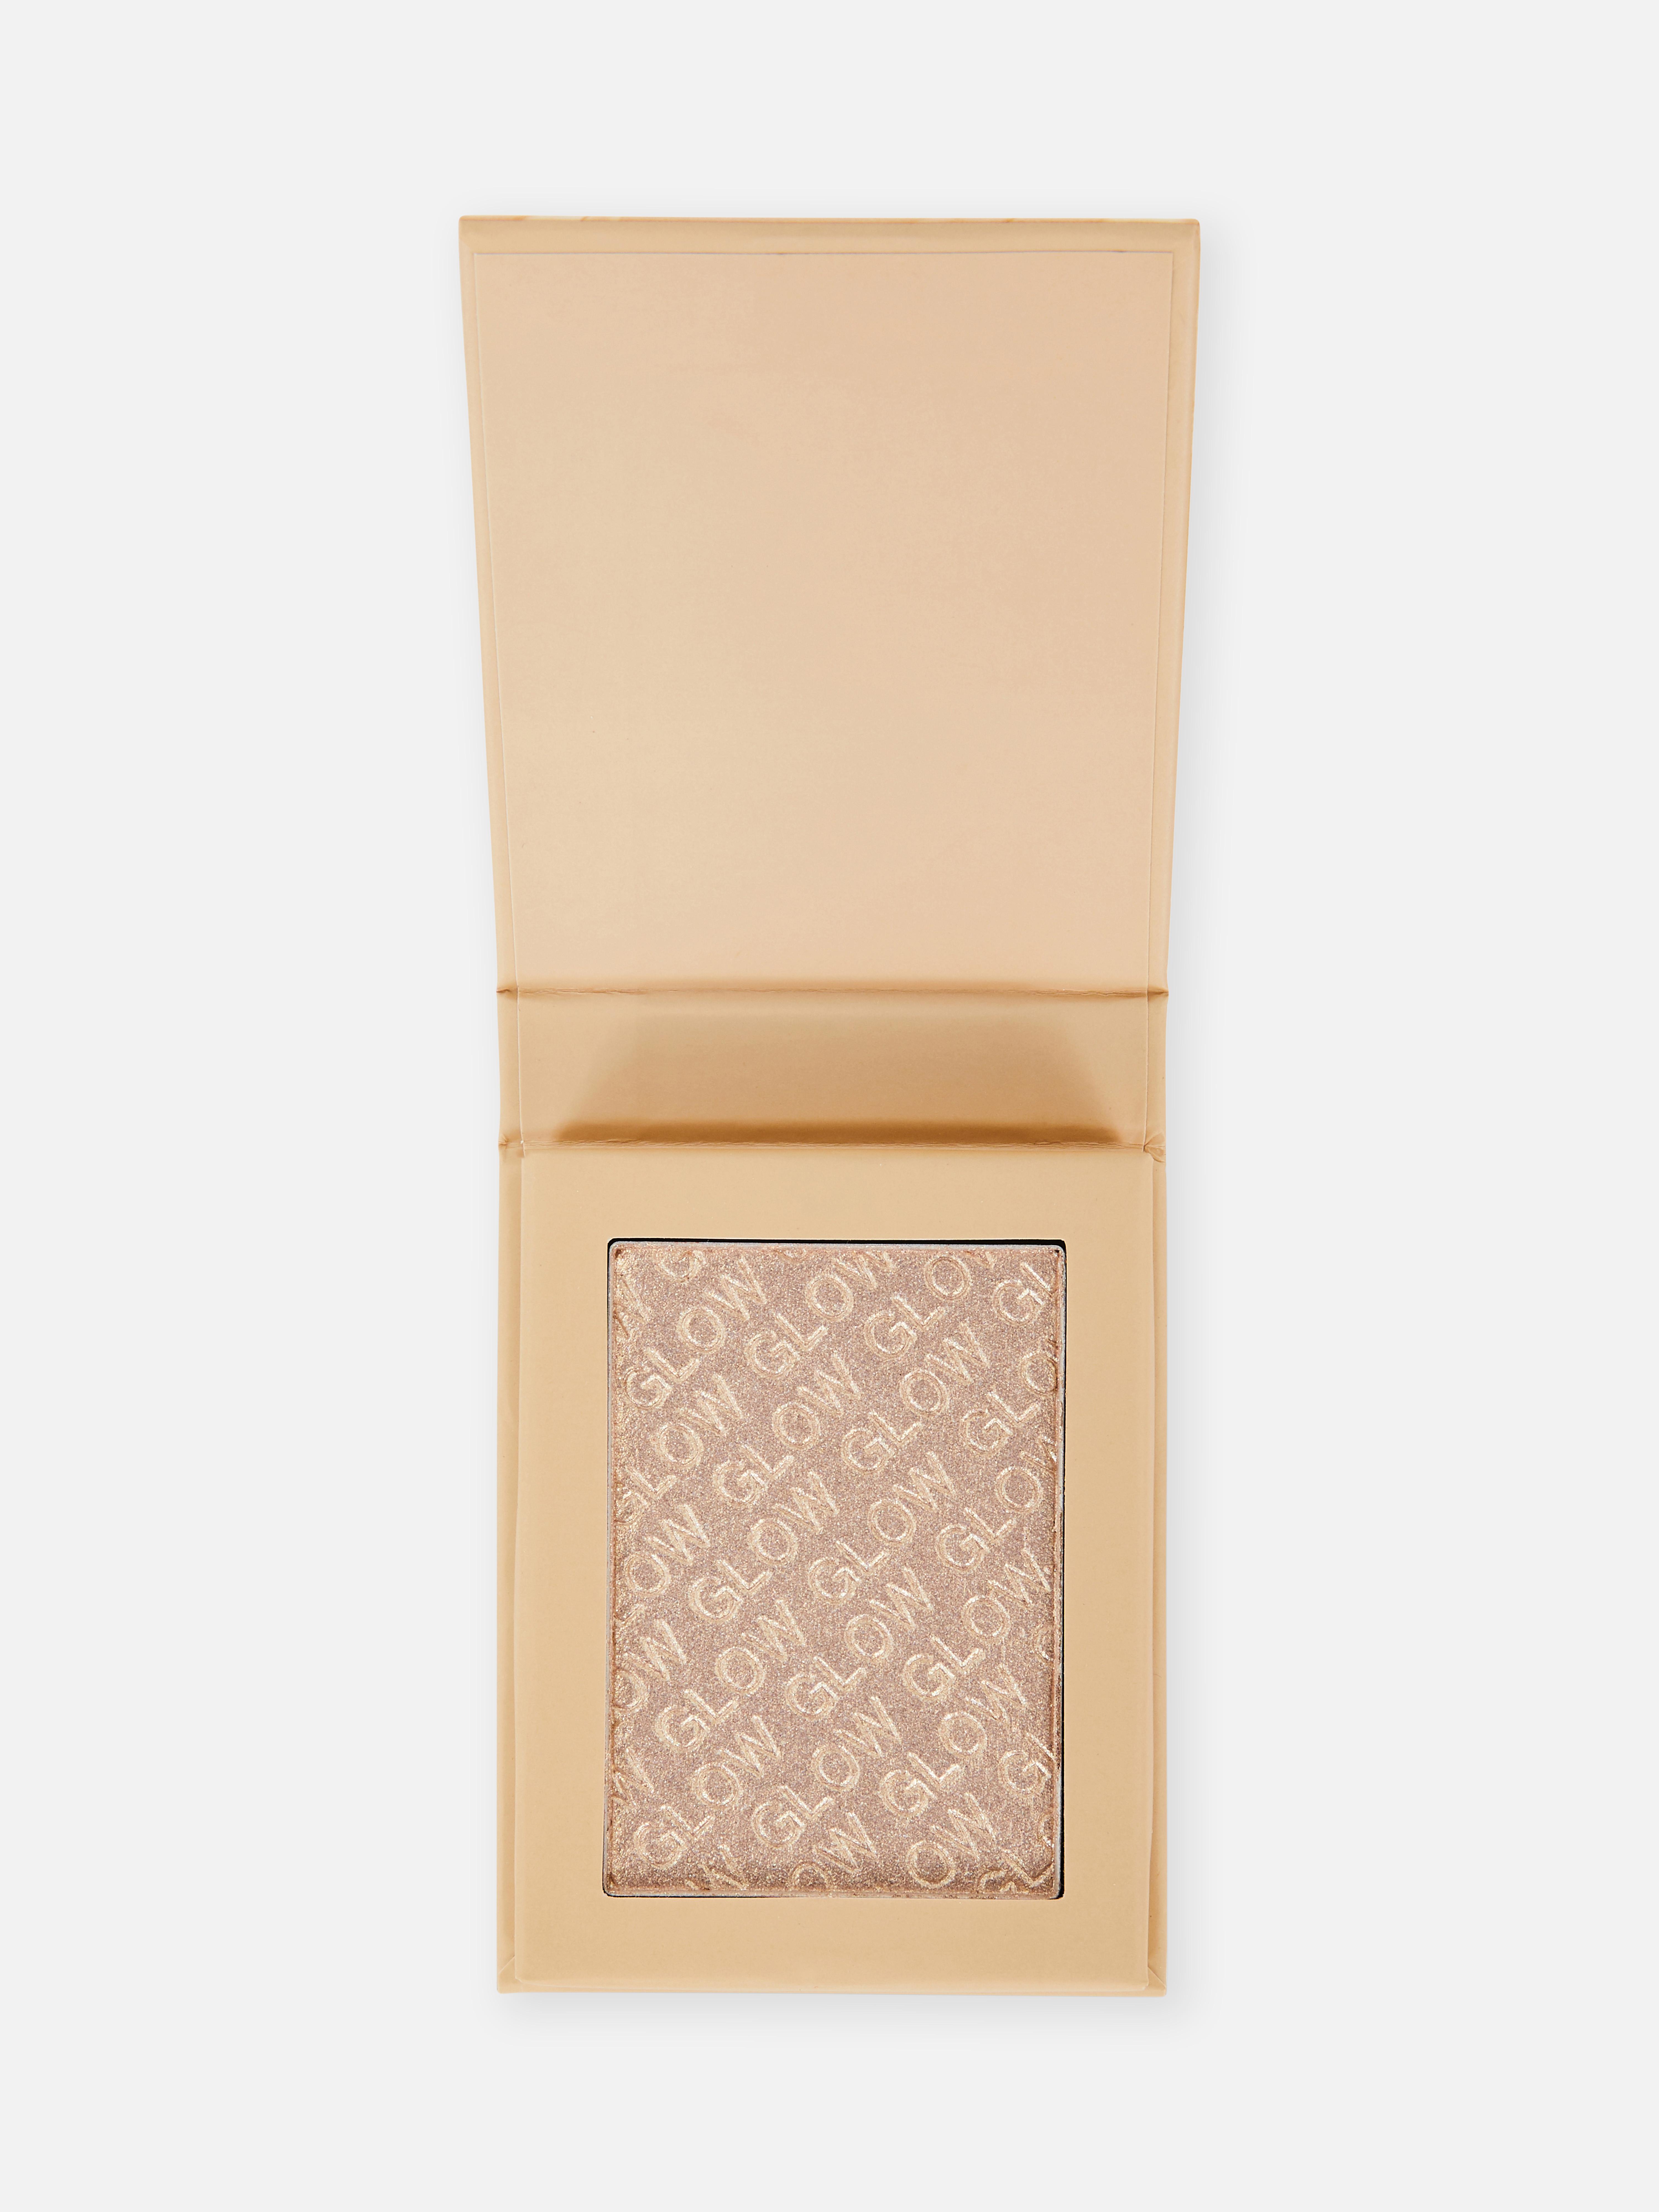 PS… „Single Glow“ Highlighter